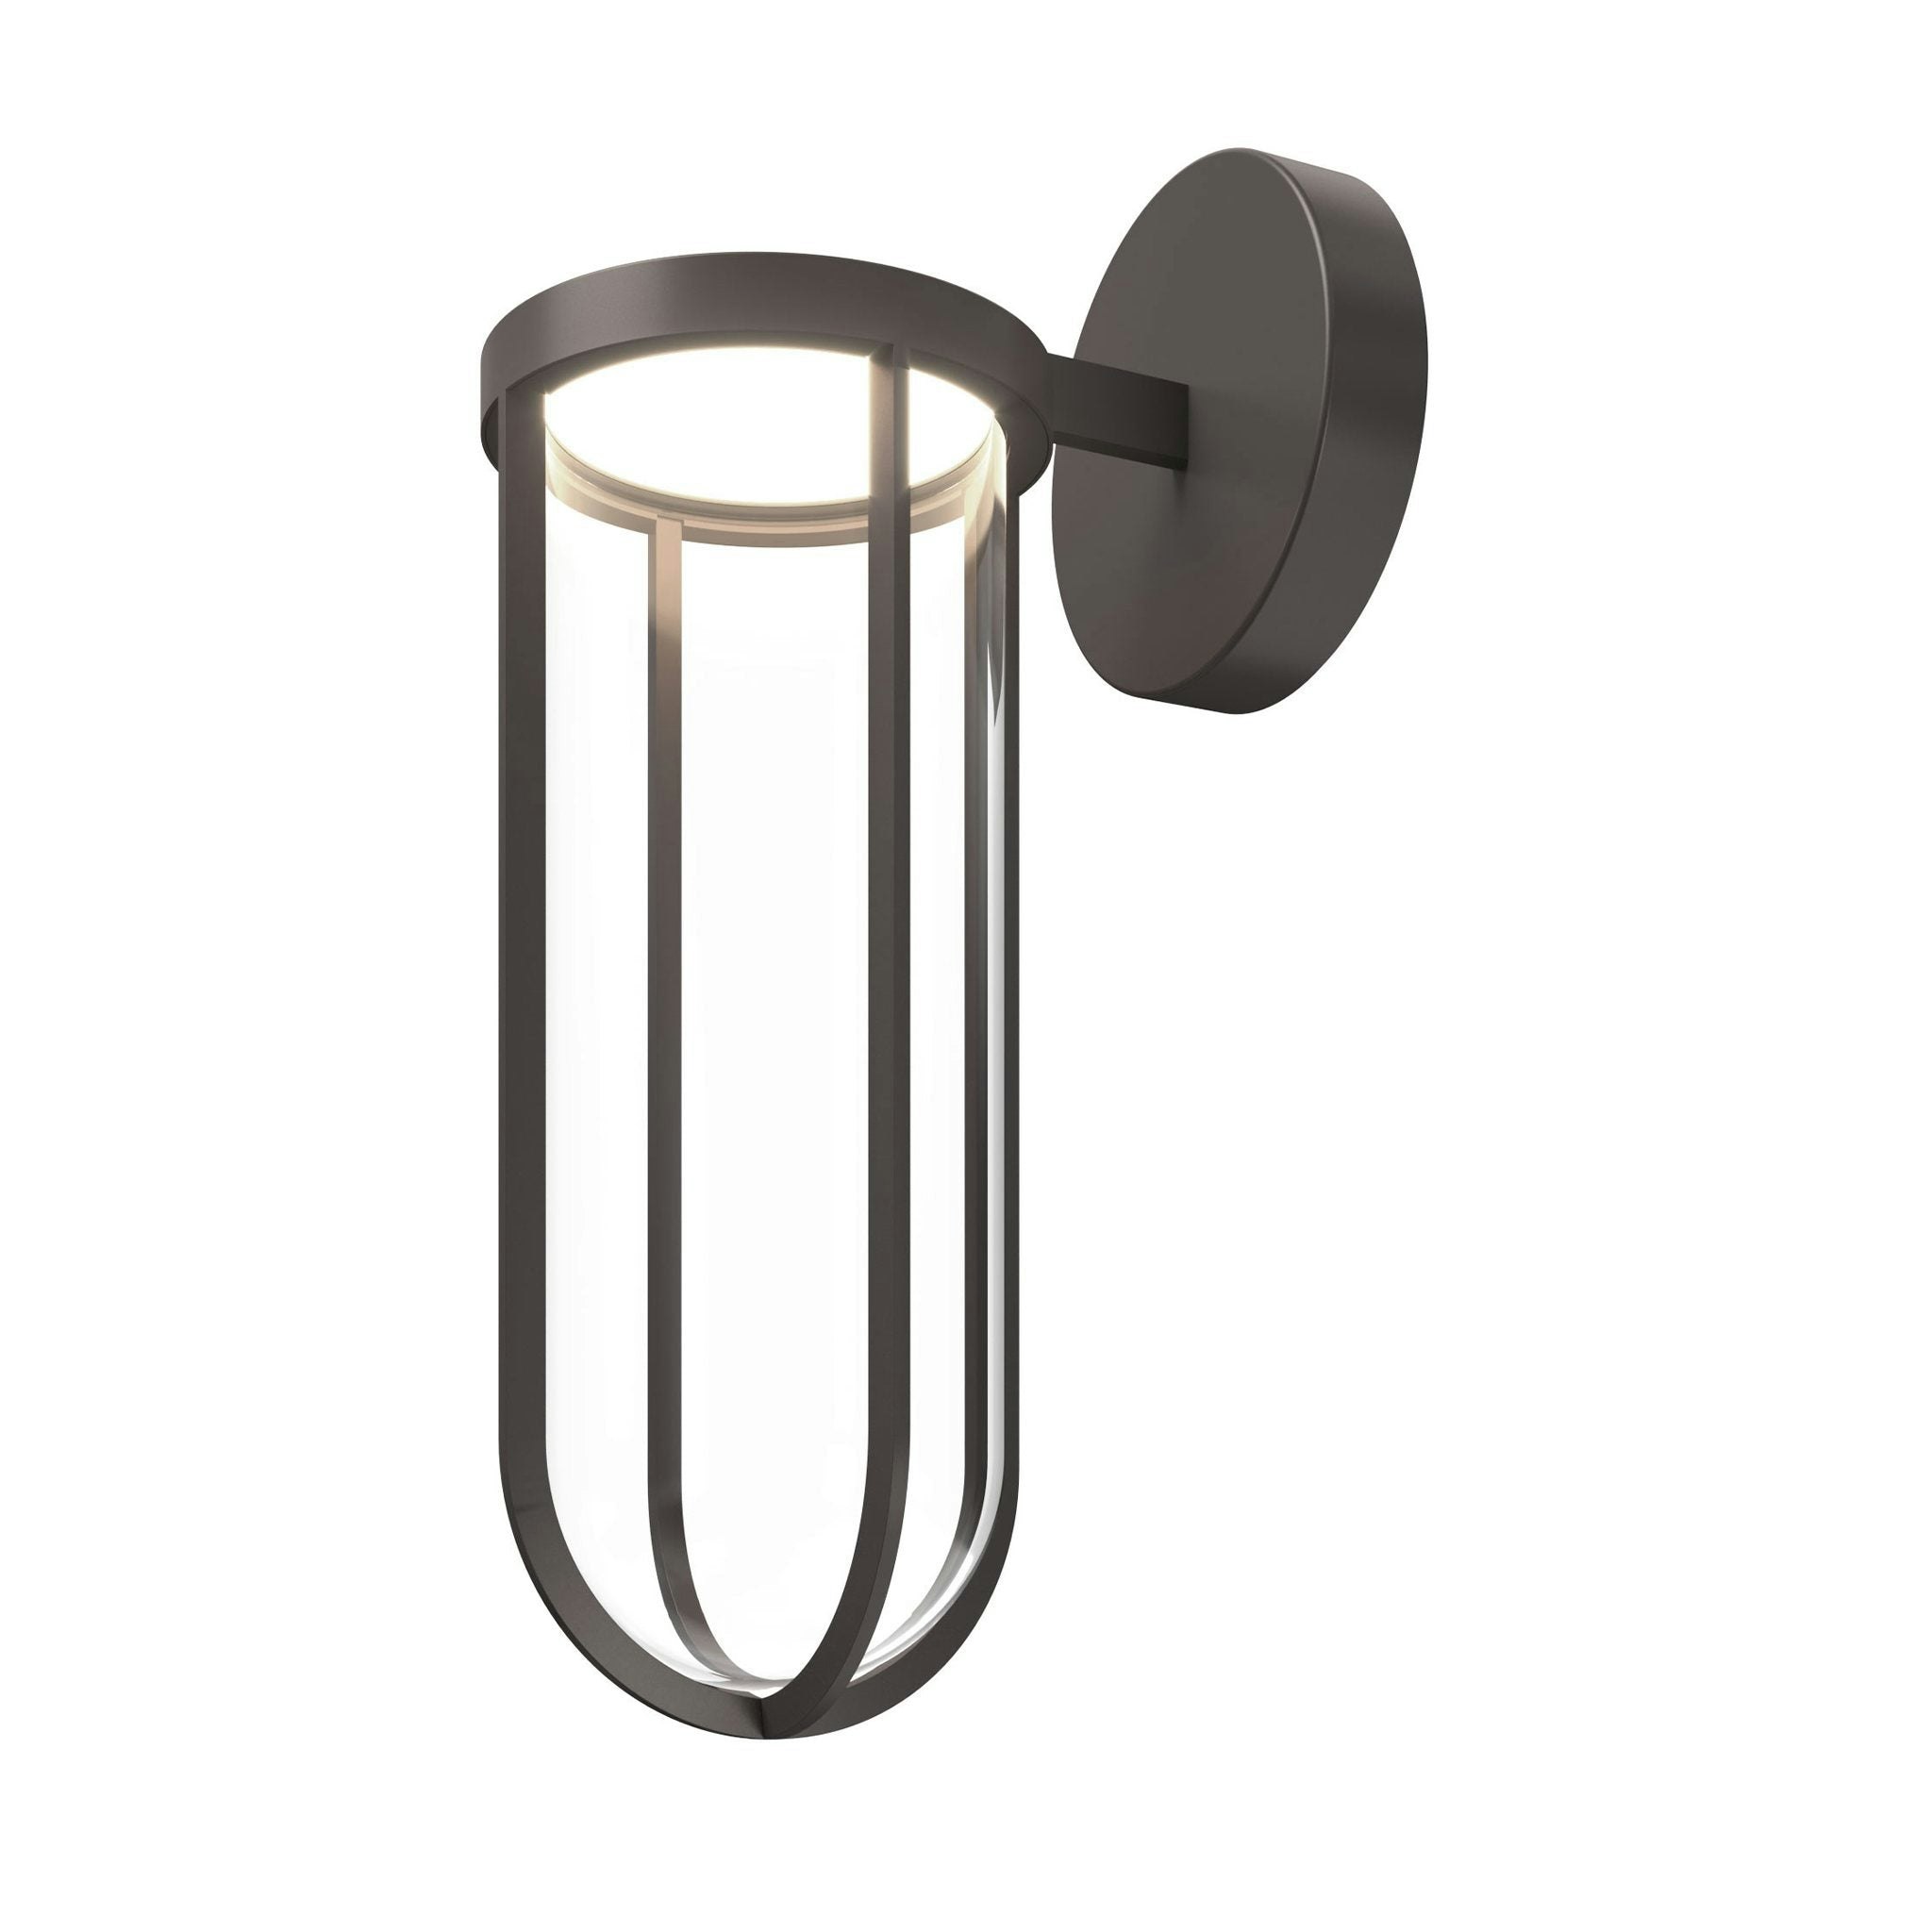 In Vitro Outdoor Wall Lamp by Philippe Starck for Flos